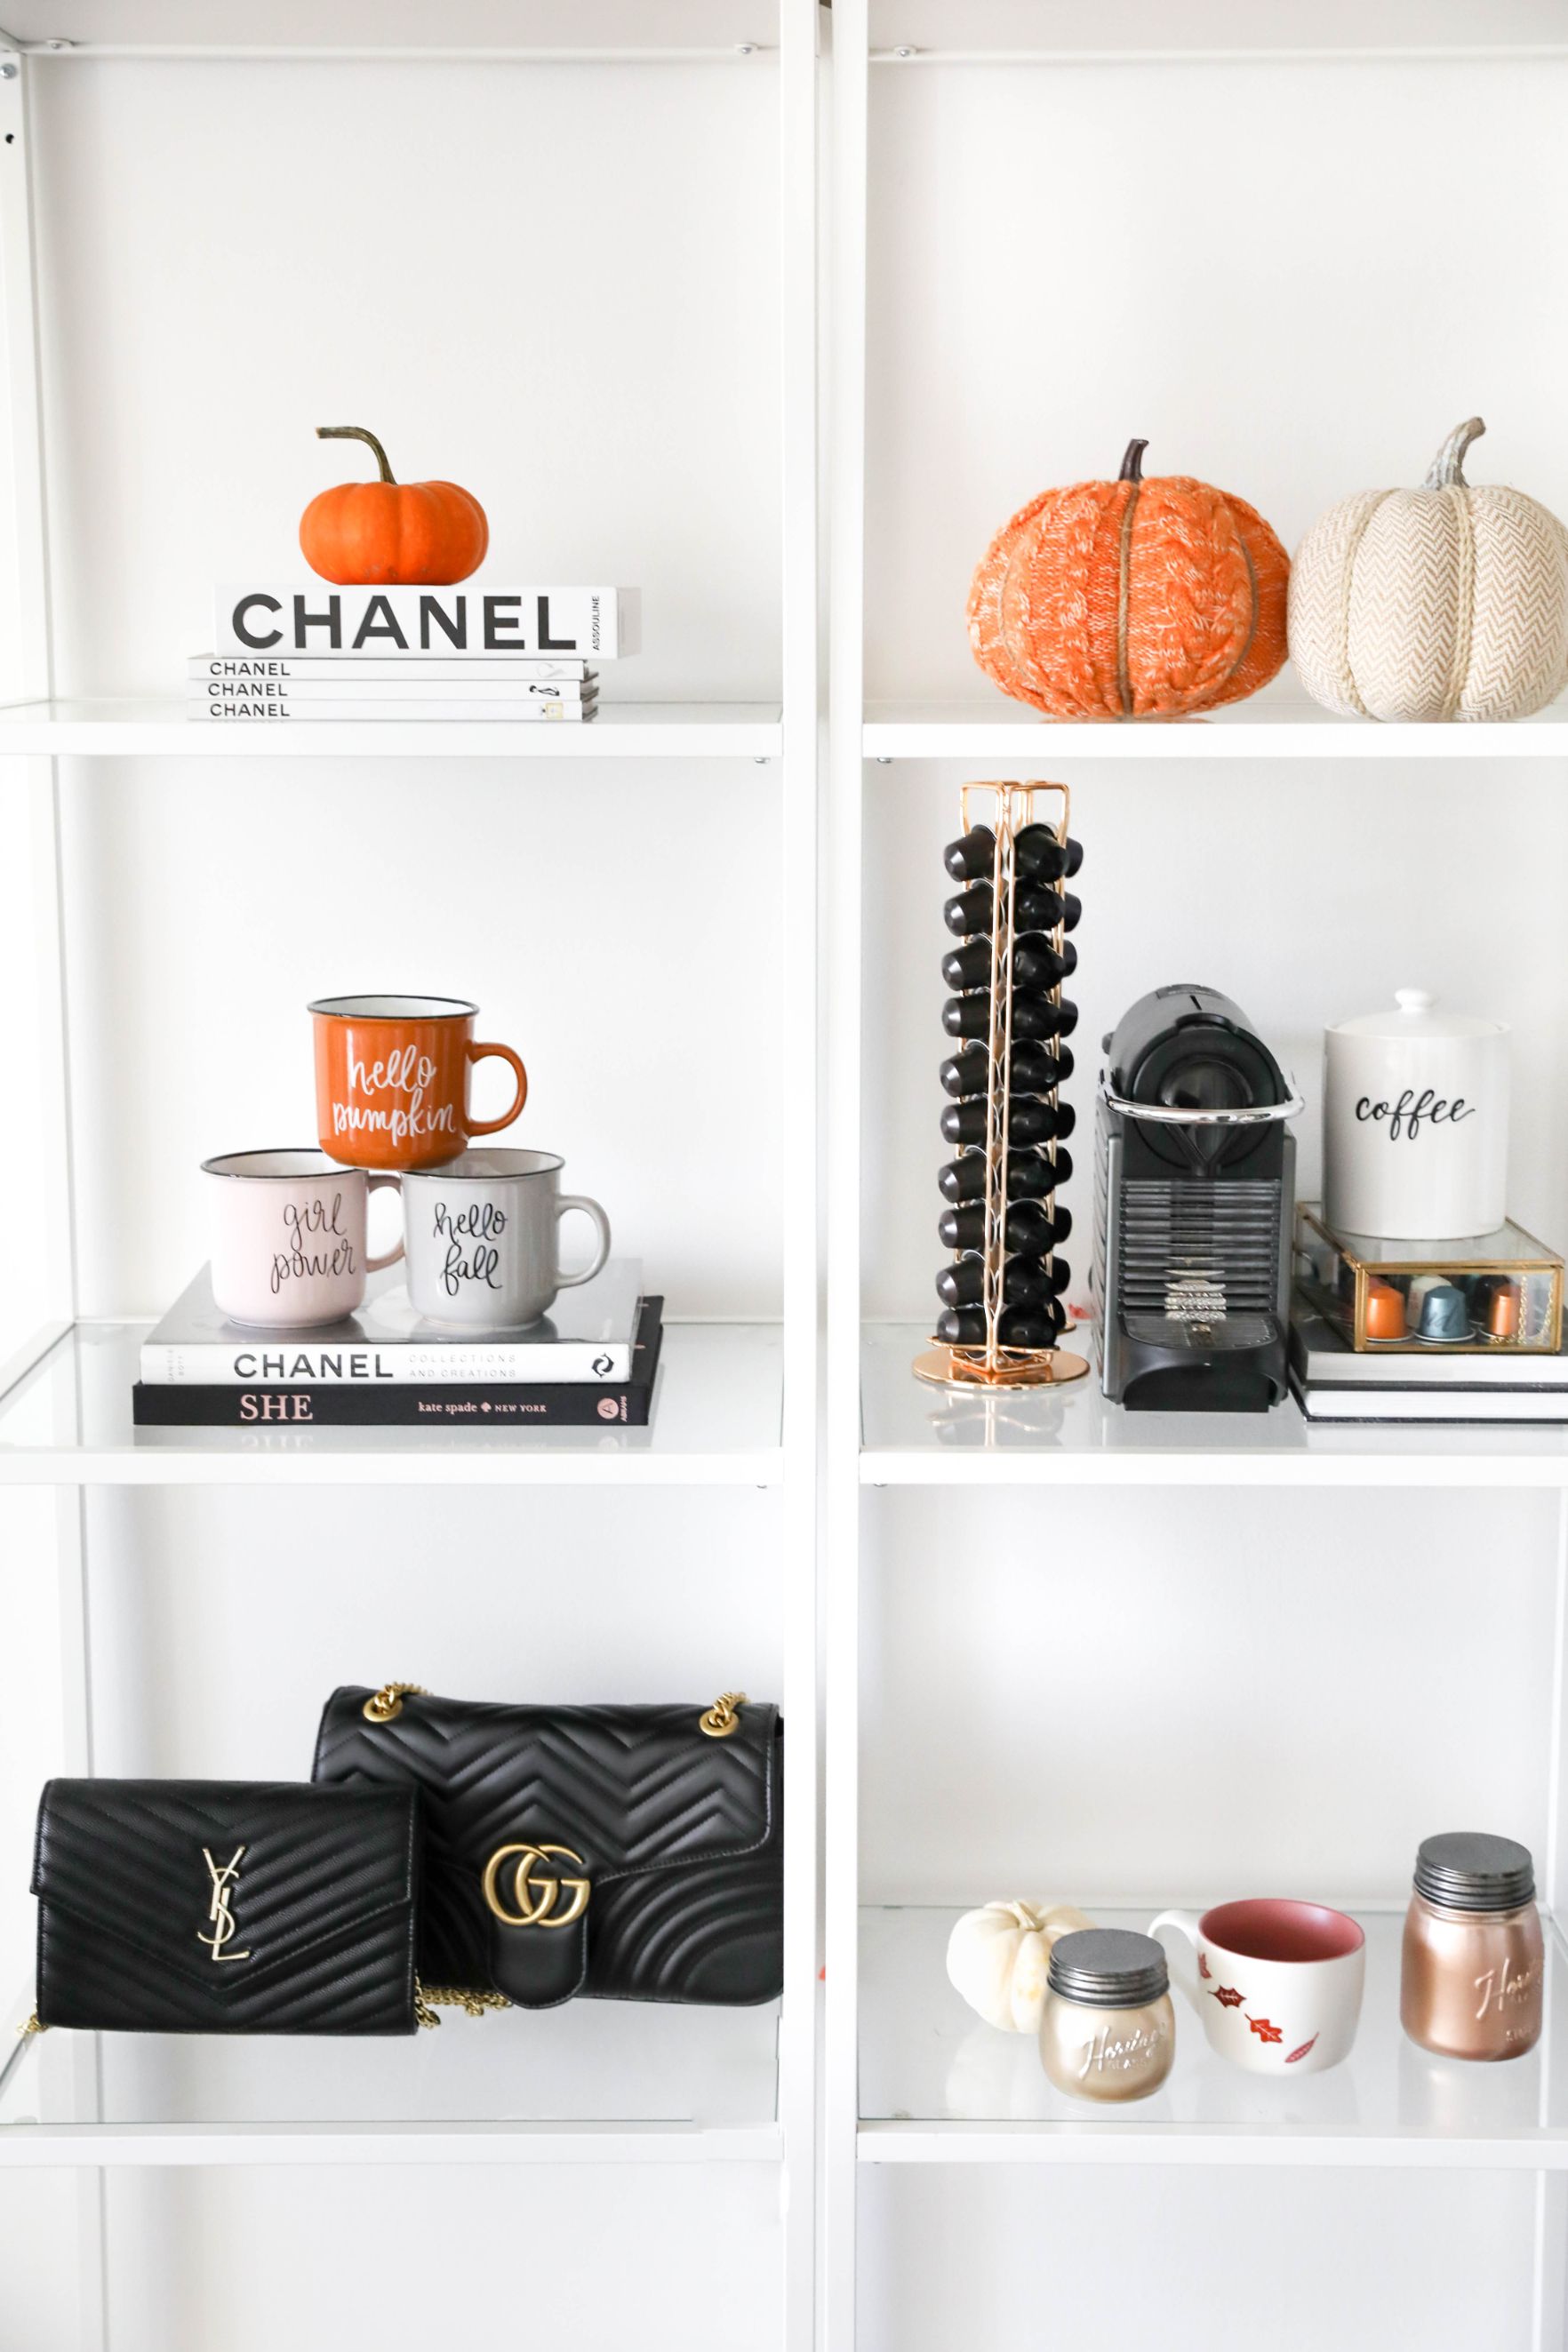 Fall Decor! Cute inspiration for your bar cart or coffee bar! Autumn Decor on Fashion Blog Daily Dose of Charm by Lauren Lindmark